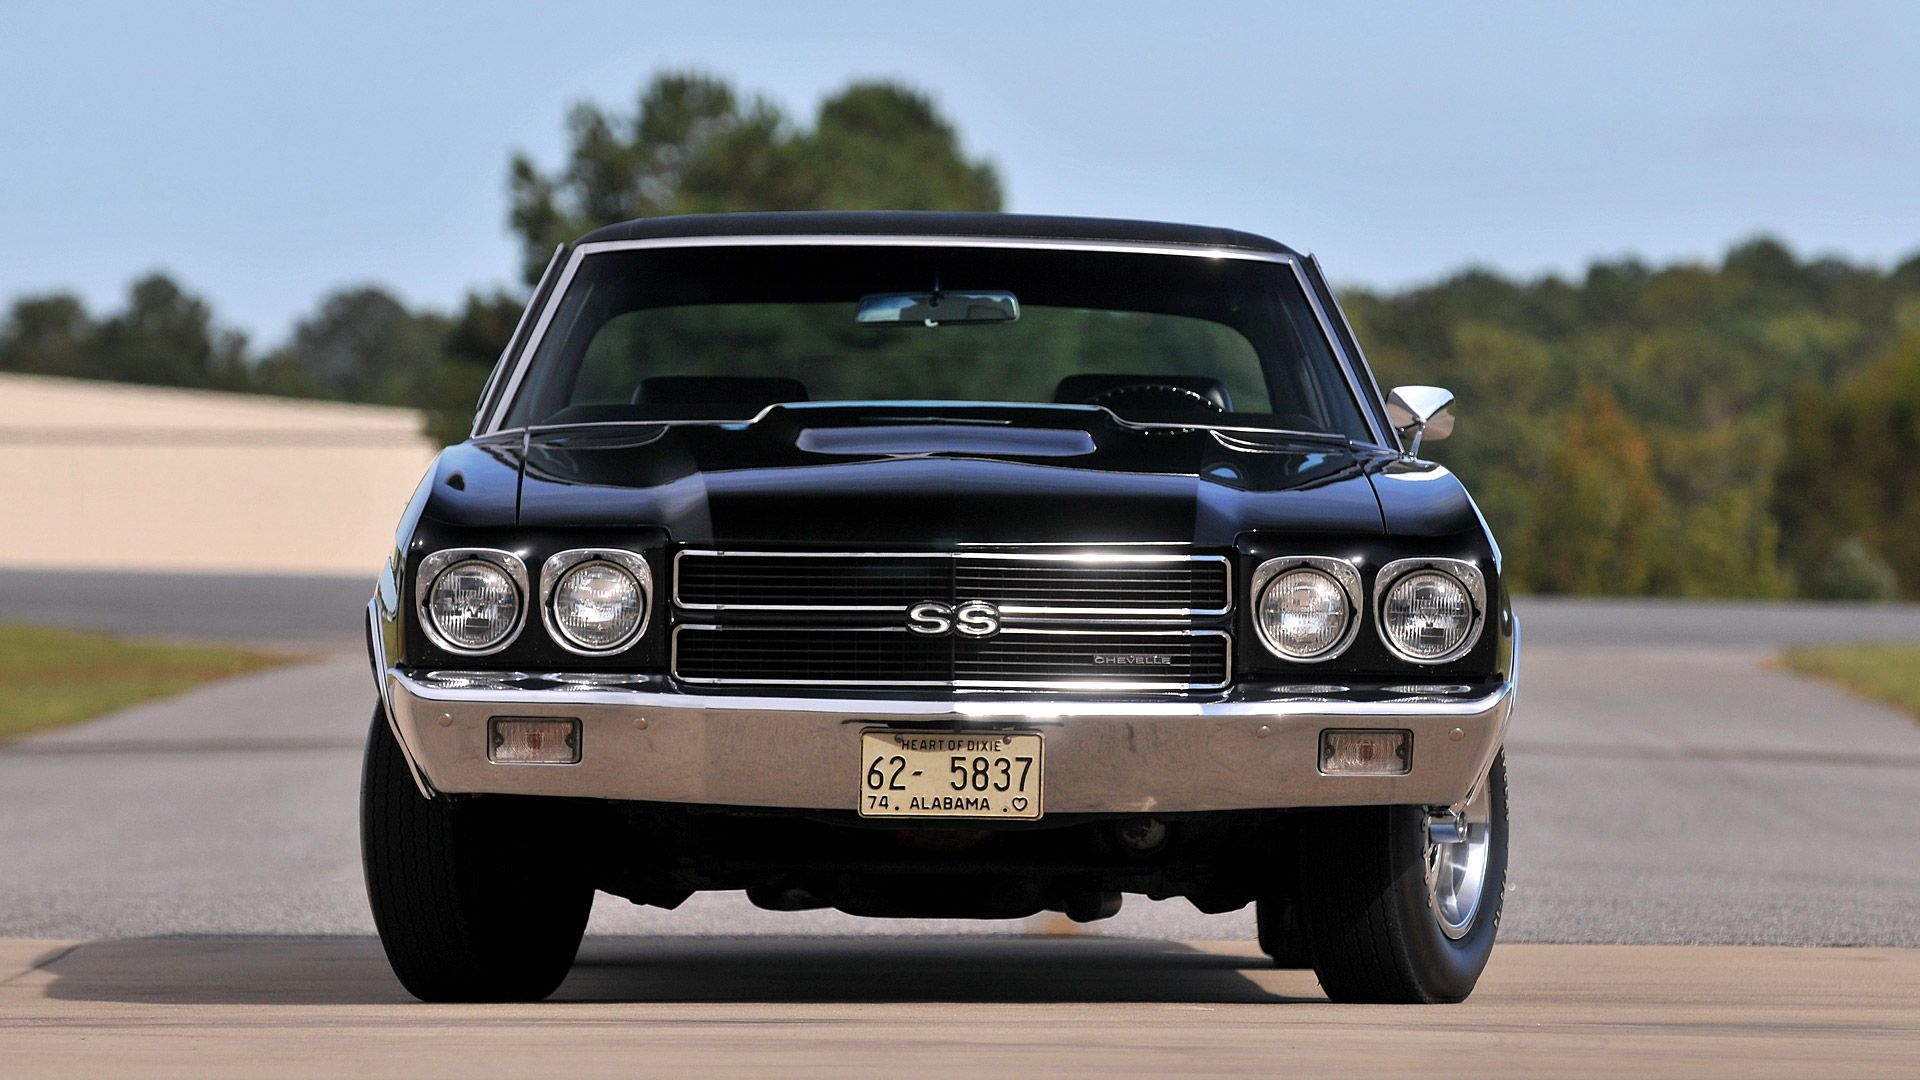 Chevrolet Chevelle SS Coupe .wsupercars.com